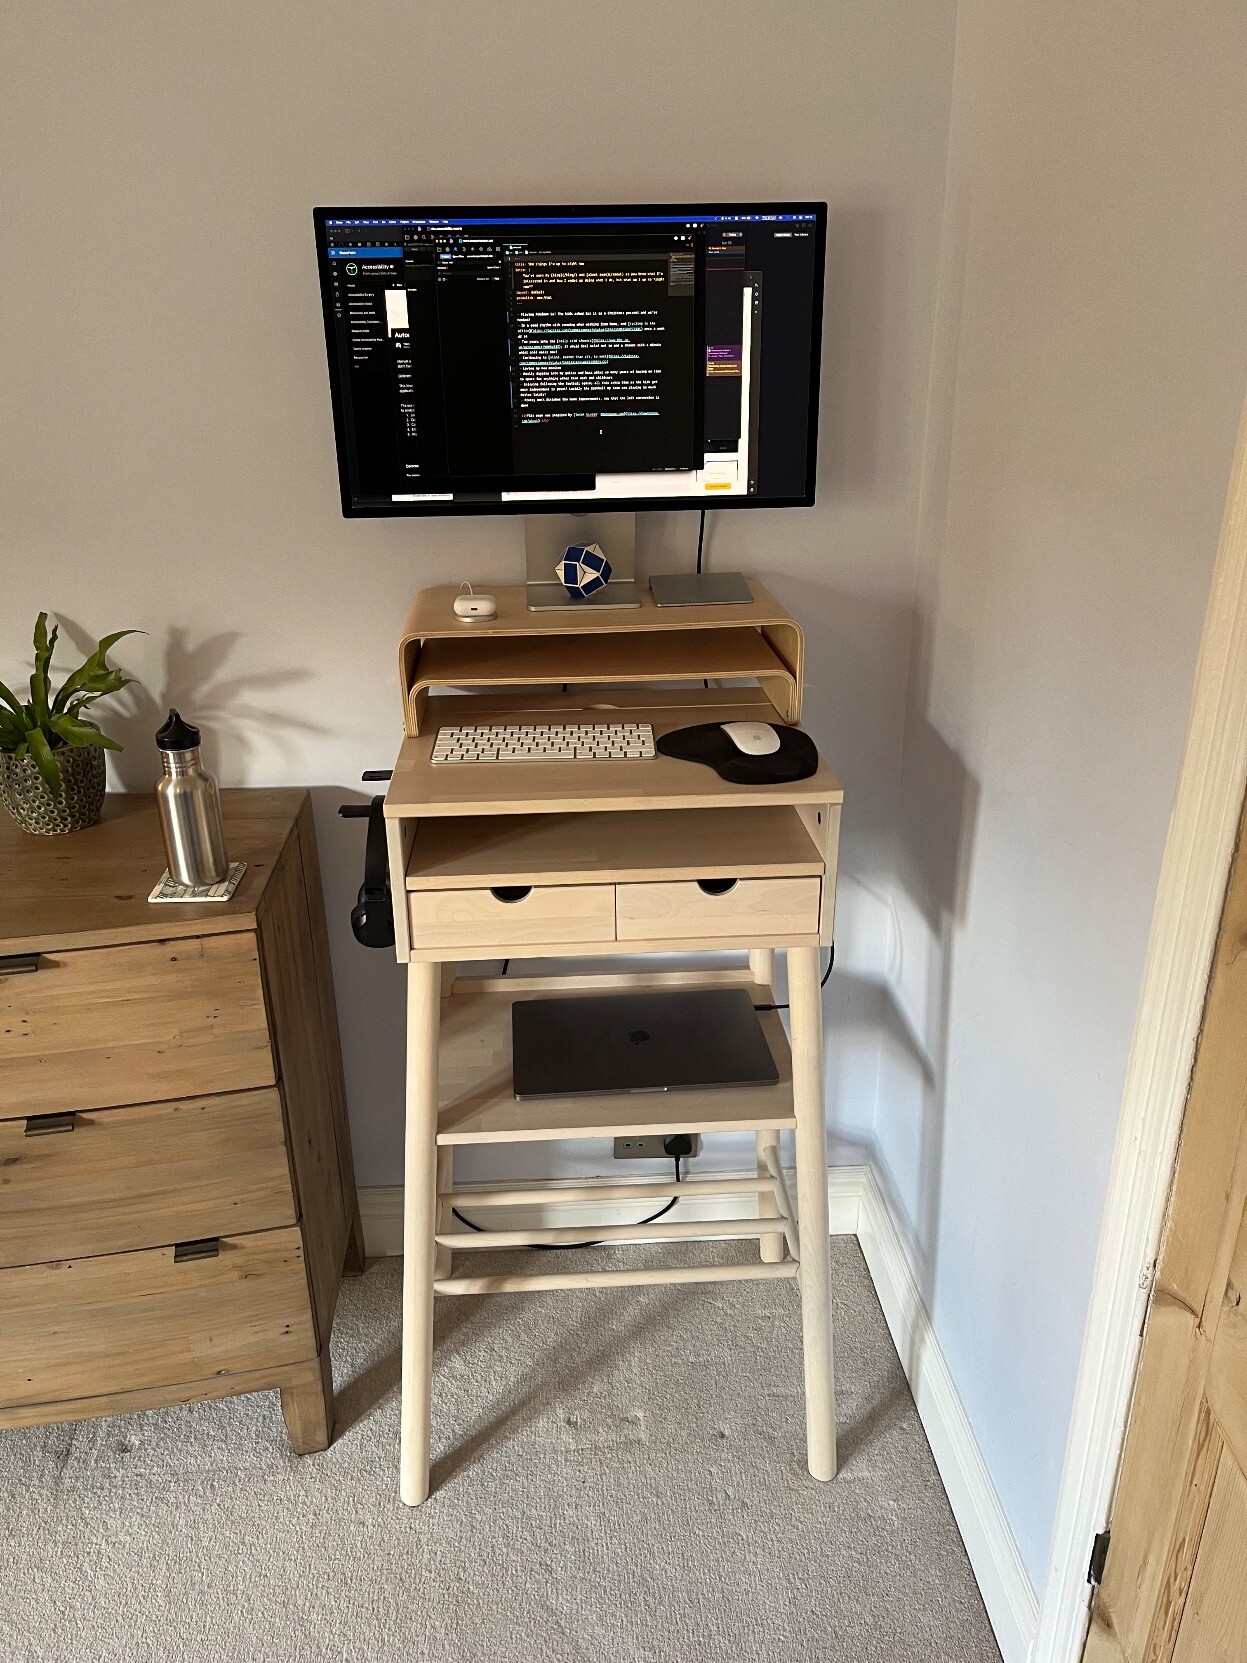 I recently built a monitor stand / desk shelf to complete my desk